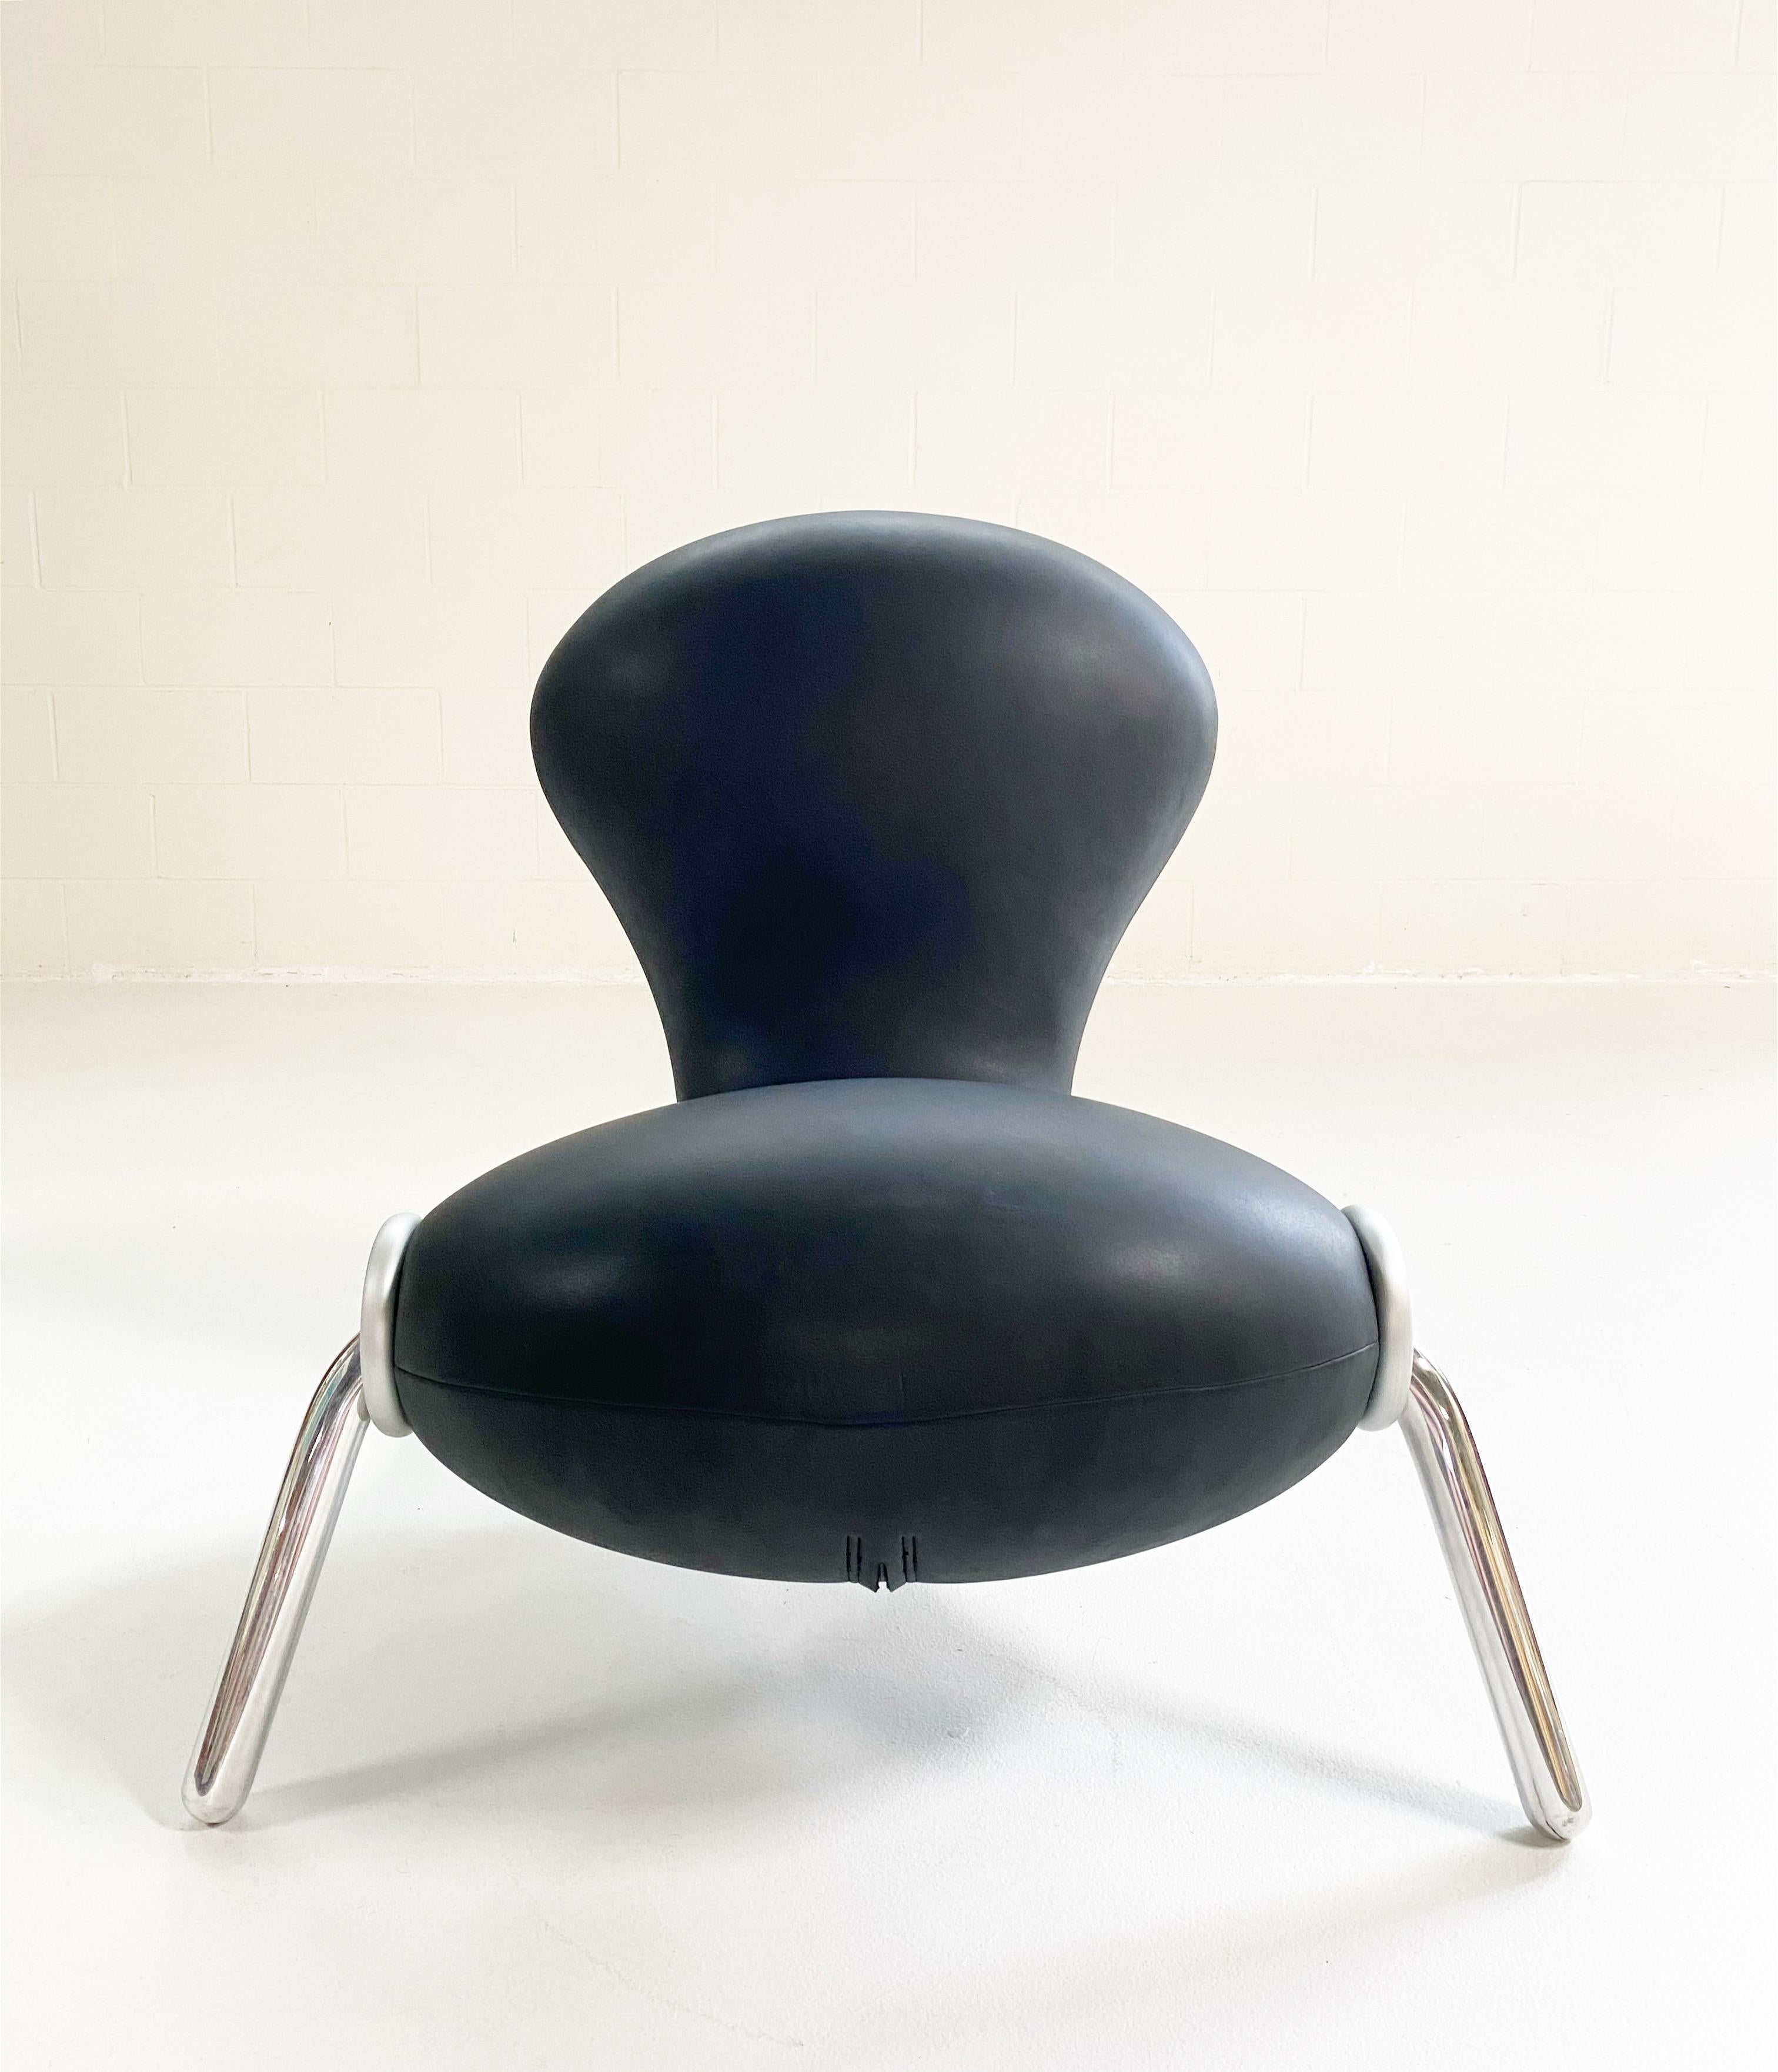 From the Marc Newson website: Stylistically, the Embryo was an important breakthrough, defining for the first time a very identifiable Marc Newson signature style. “So many qualities of that chair laid down the DNA for much of what I was to do after